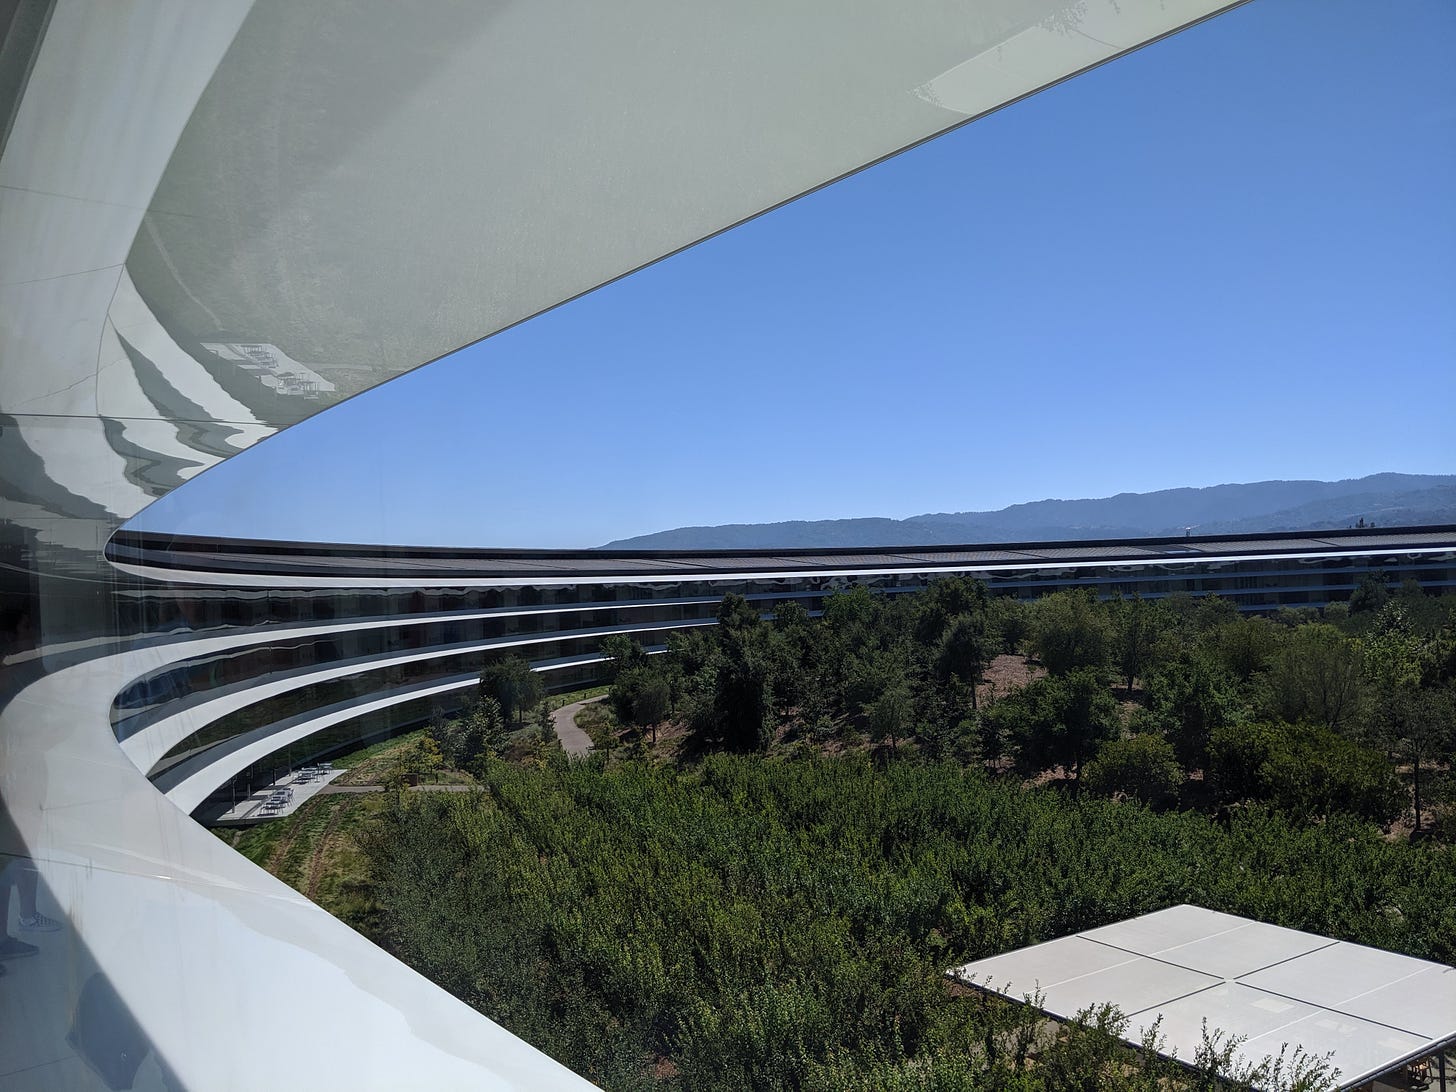 CC-BY licensed photo of Apple Park by Travis Wise at https://www.flickr.com/photos/94599716@N06/48562854336